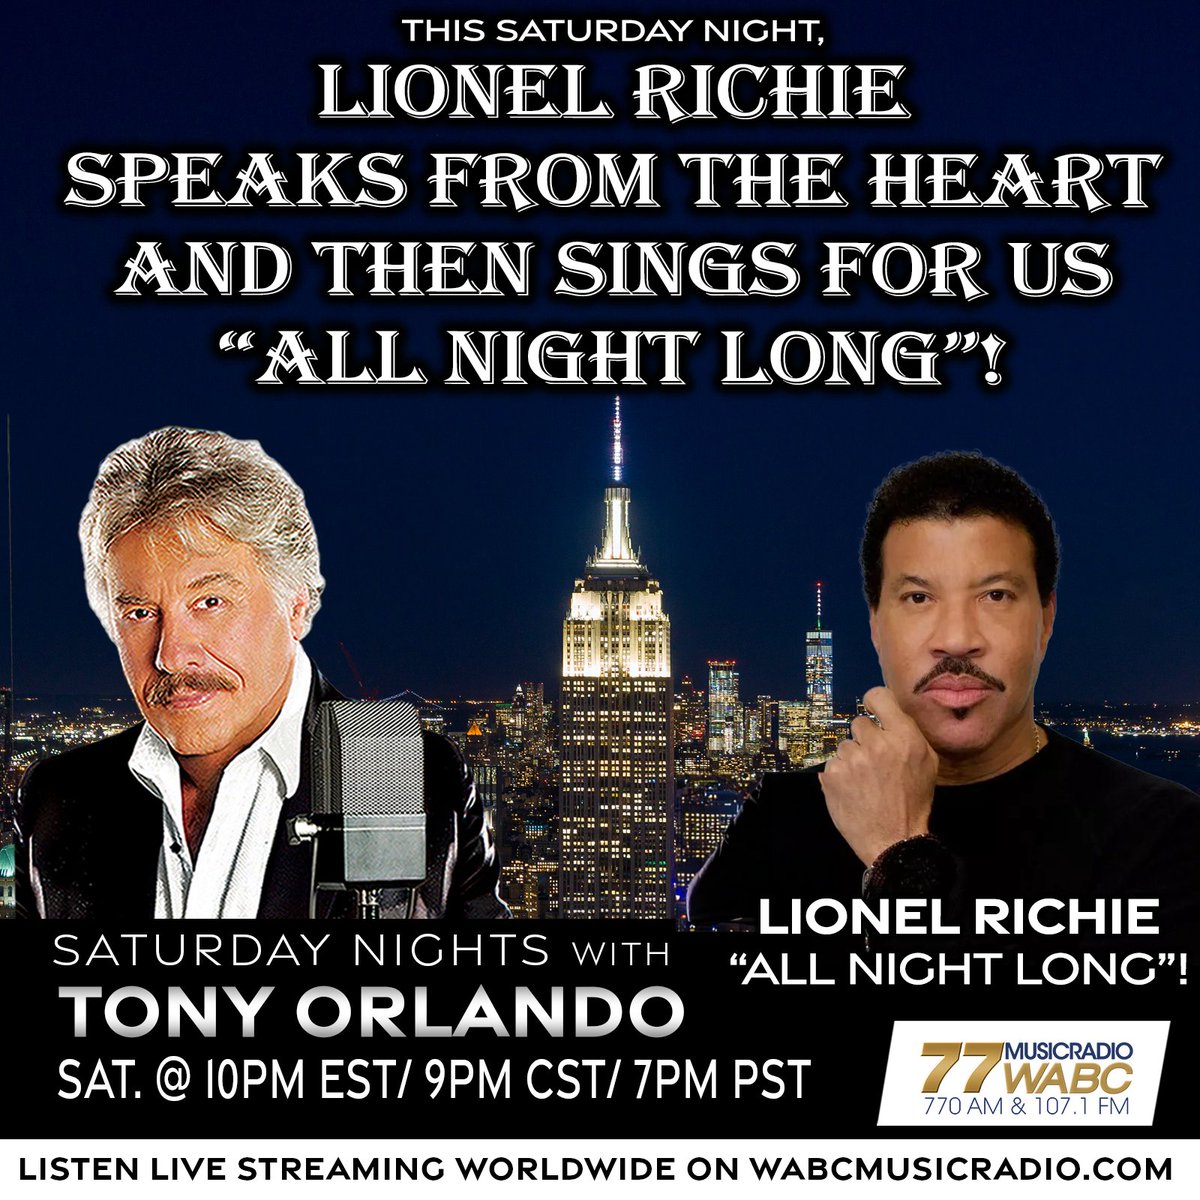 TONIGHT at 10PM: Lionel Richie Speaks From The Heart Host @TonyOrlando plays the hits with @LionelRichie 'All Night Long!' Join us TONIGHT from 10PM-midnight on wabcmusicradio.com, 770 AM, or on the 77 WABC app! #77WABCRadio #Music #TonyOrlando